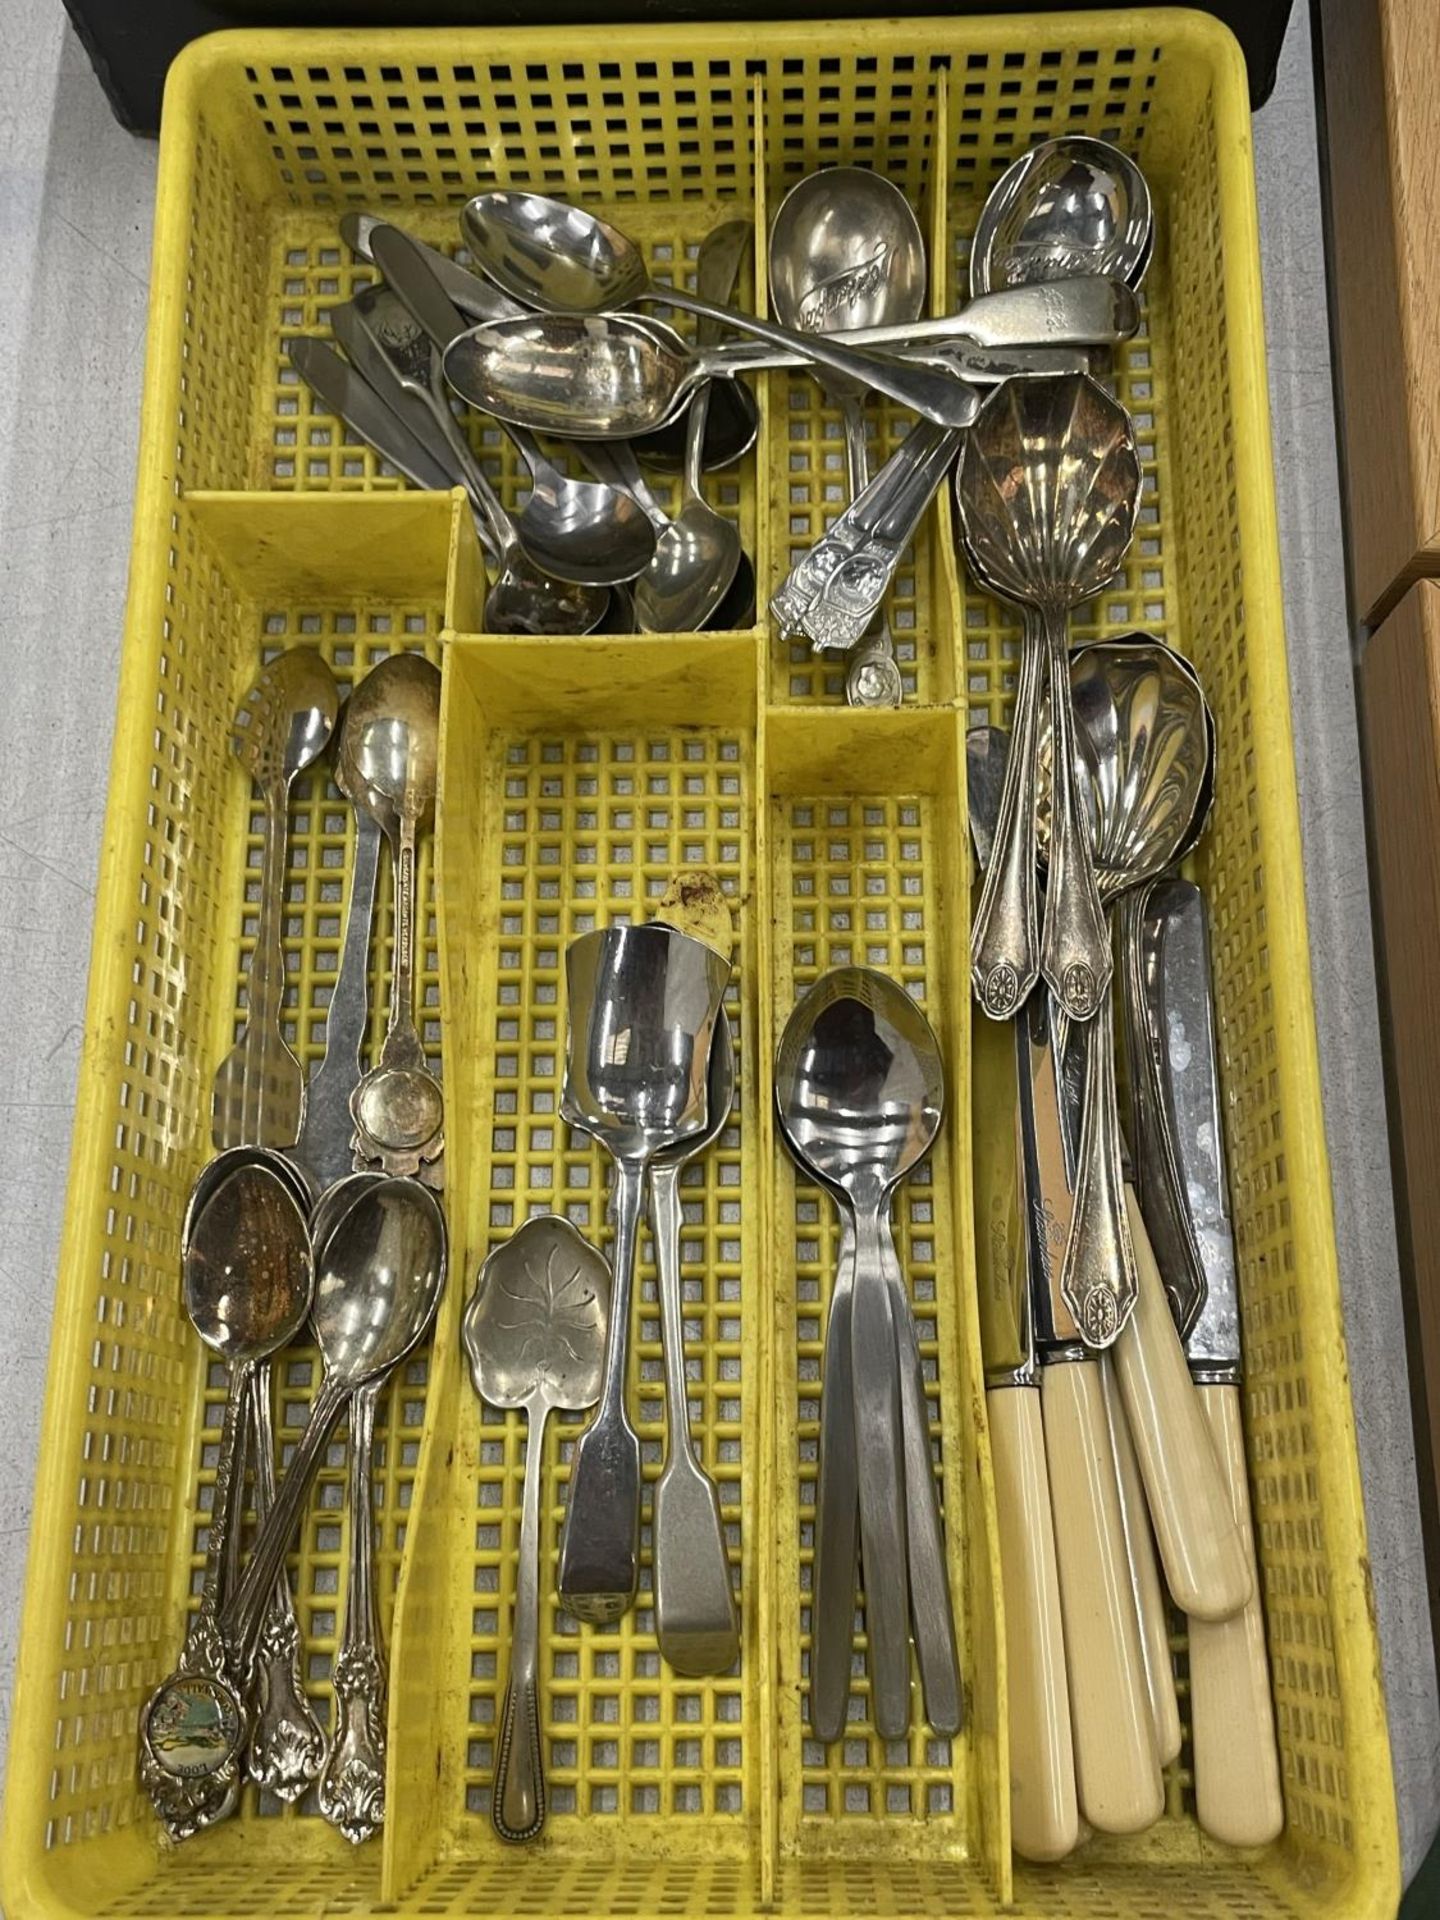 A LARGE QUANTITY OF VINTAGE FLATWARE TO INCLUDE KNIVES, FORKS, SPOONS, LADELS, ETC - Image 2 of 3